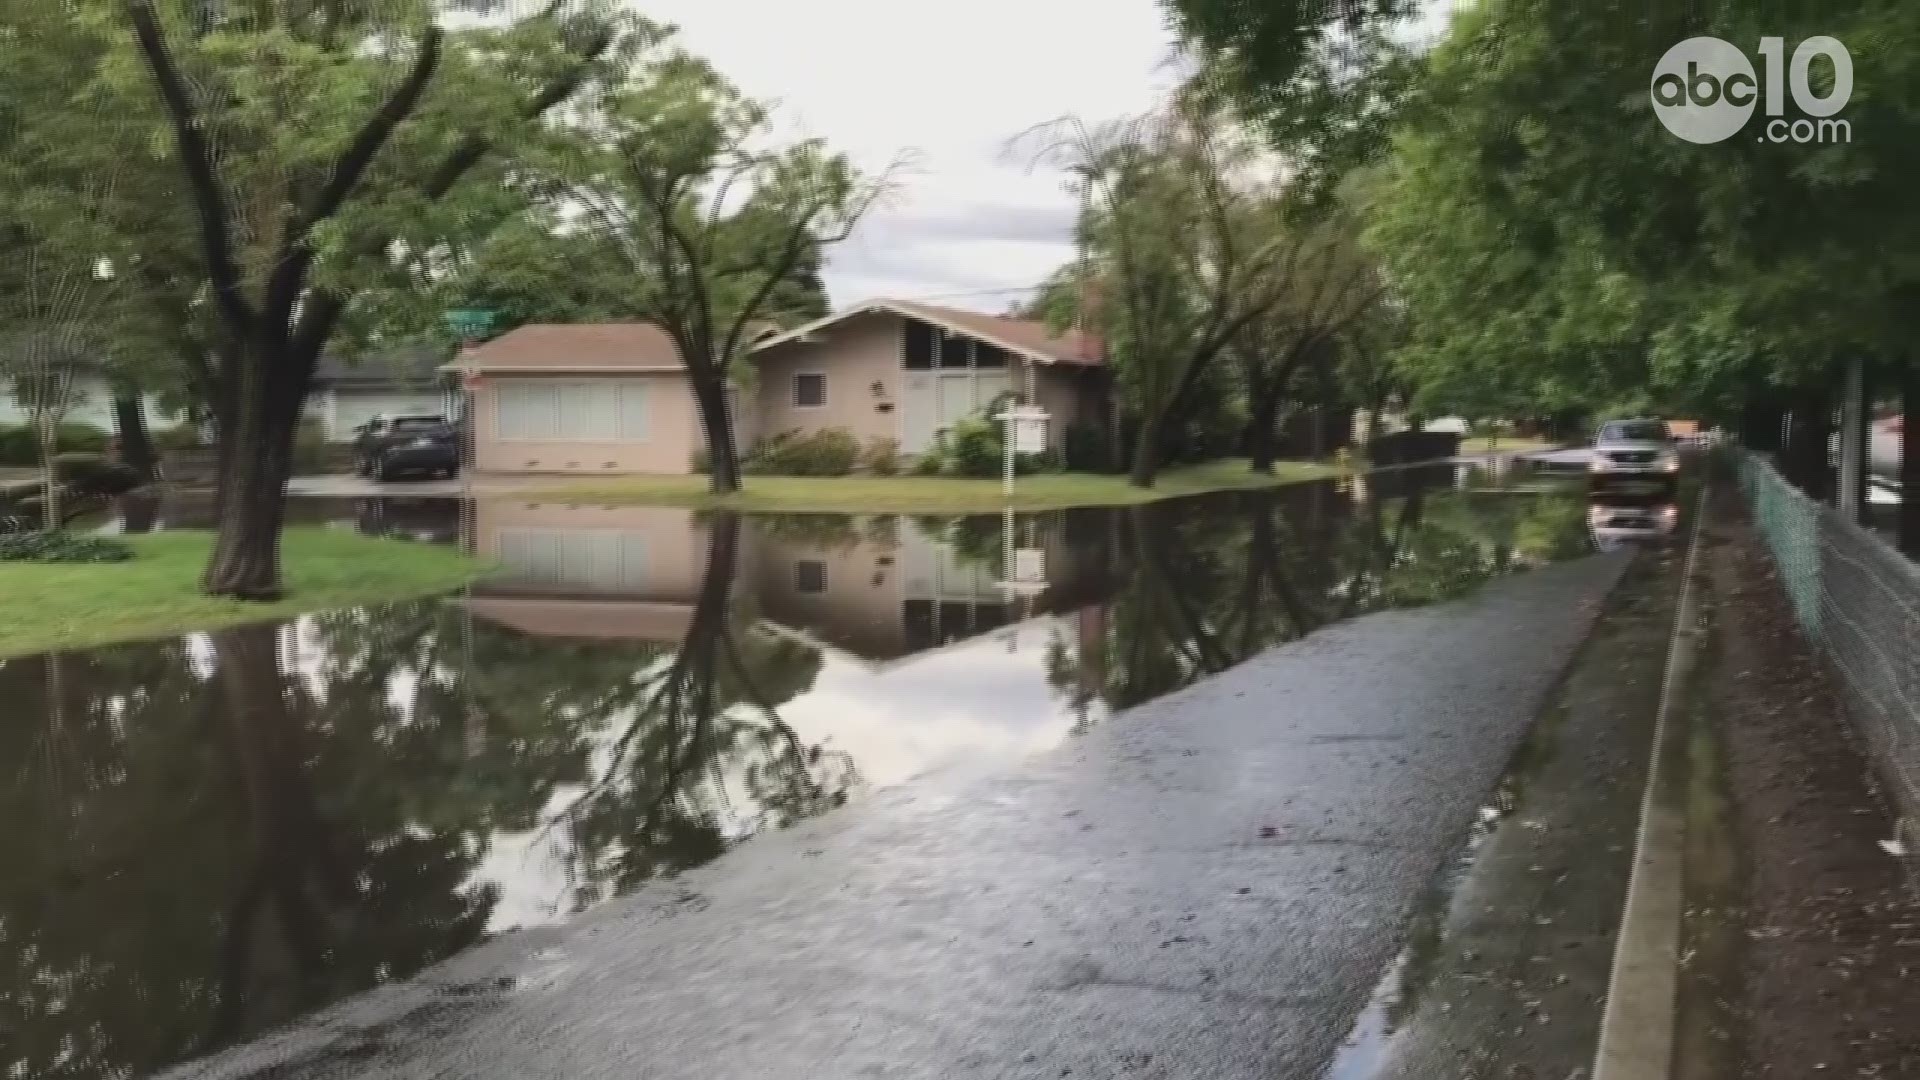 The city of Stockton was hit hard by rain and hail during a storm on Sunday. Multiple areas experienced flooding including the intersection of Rialto and Pacific.